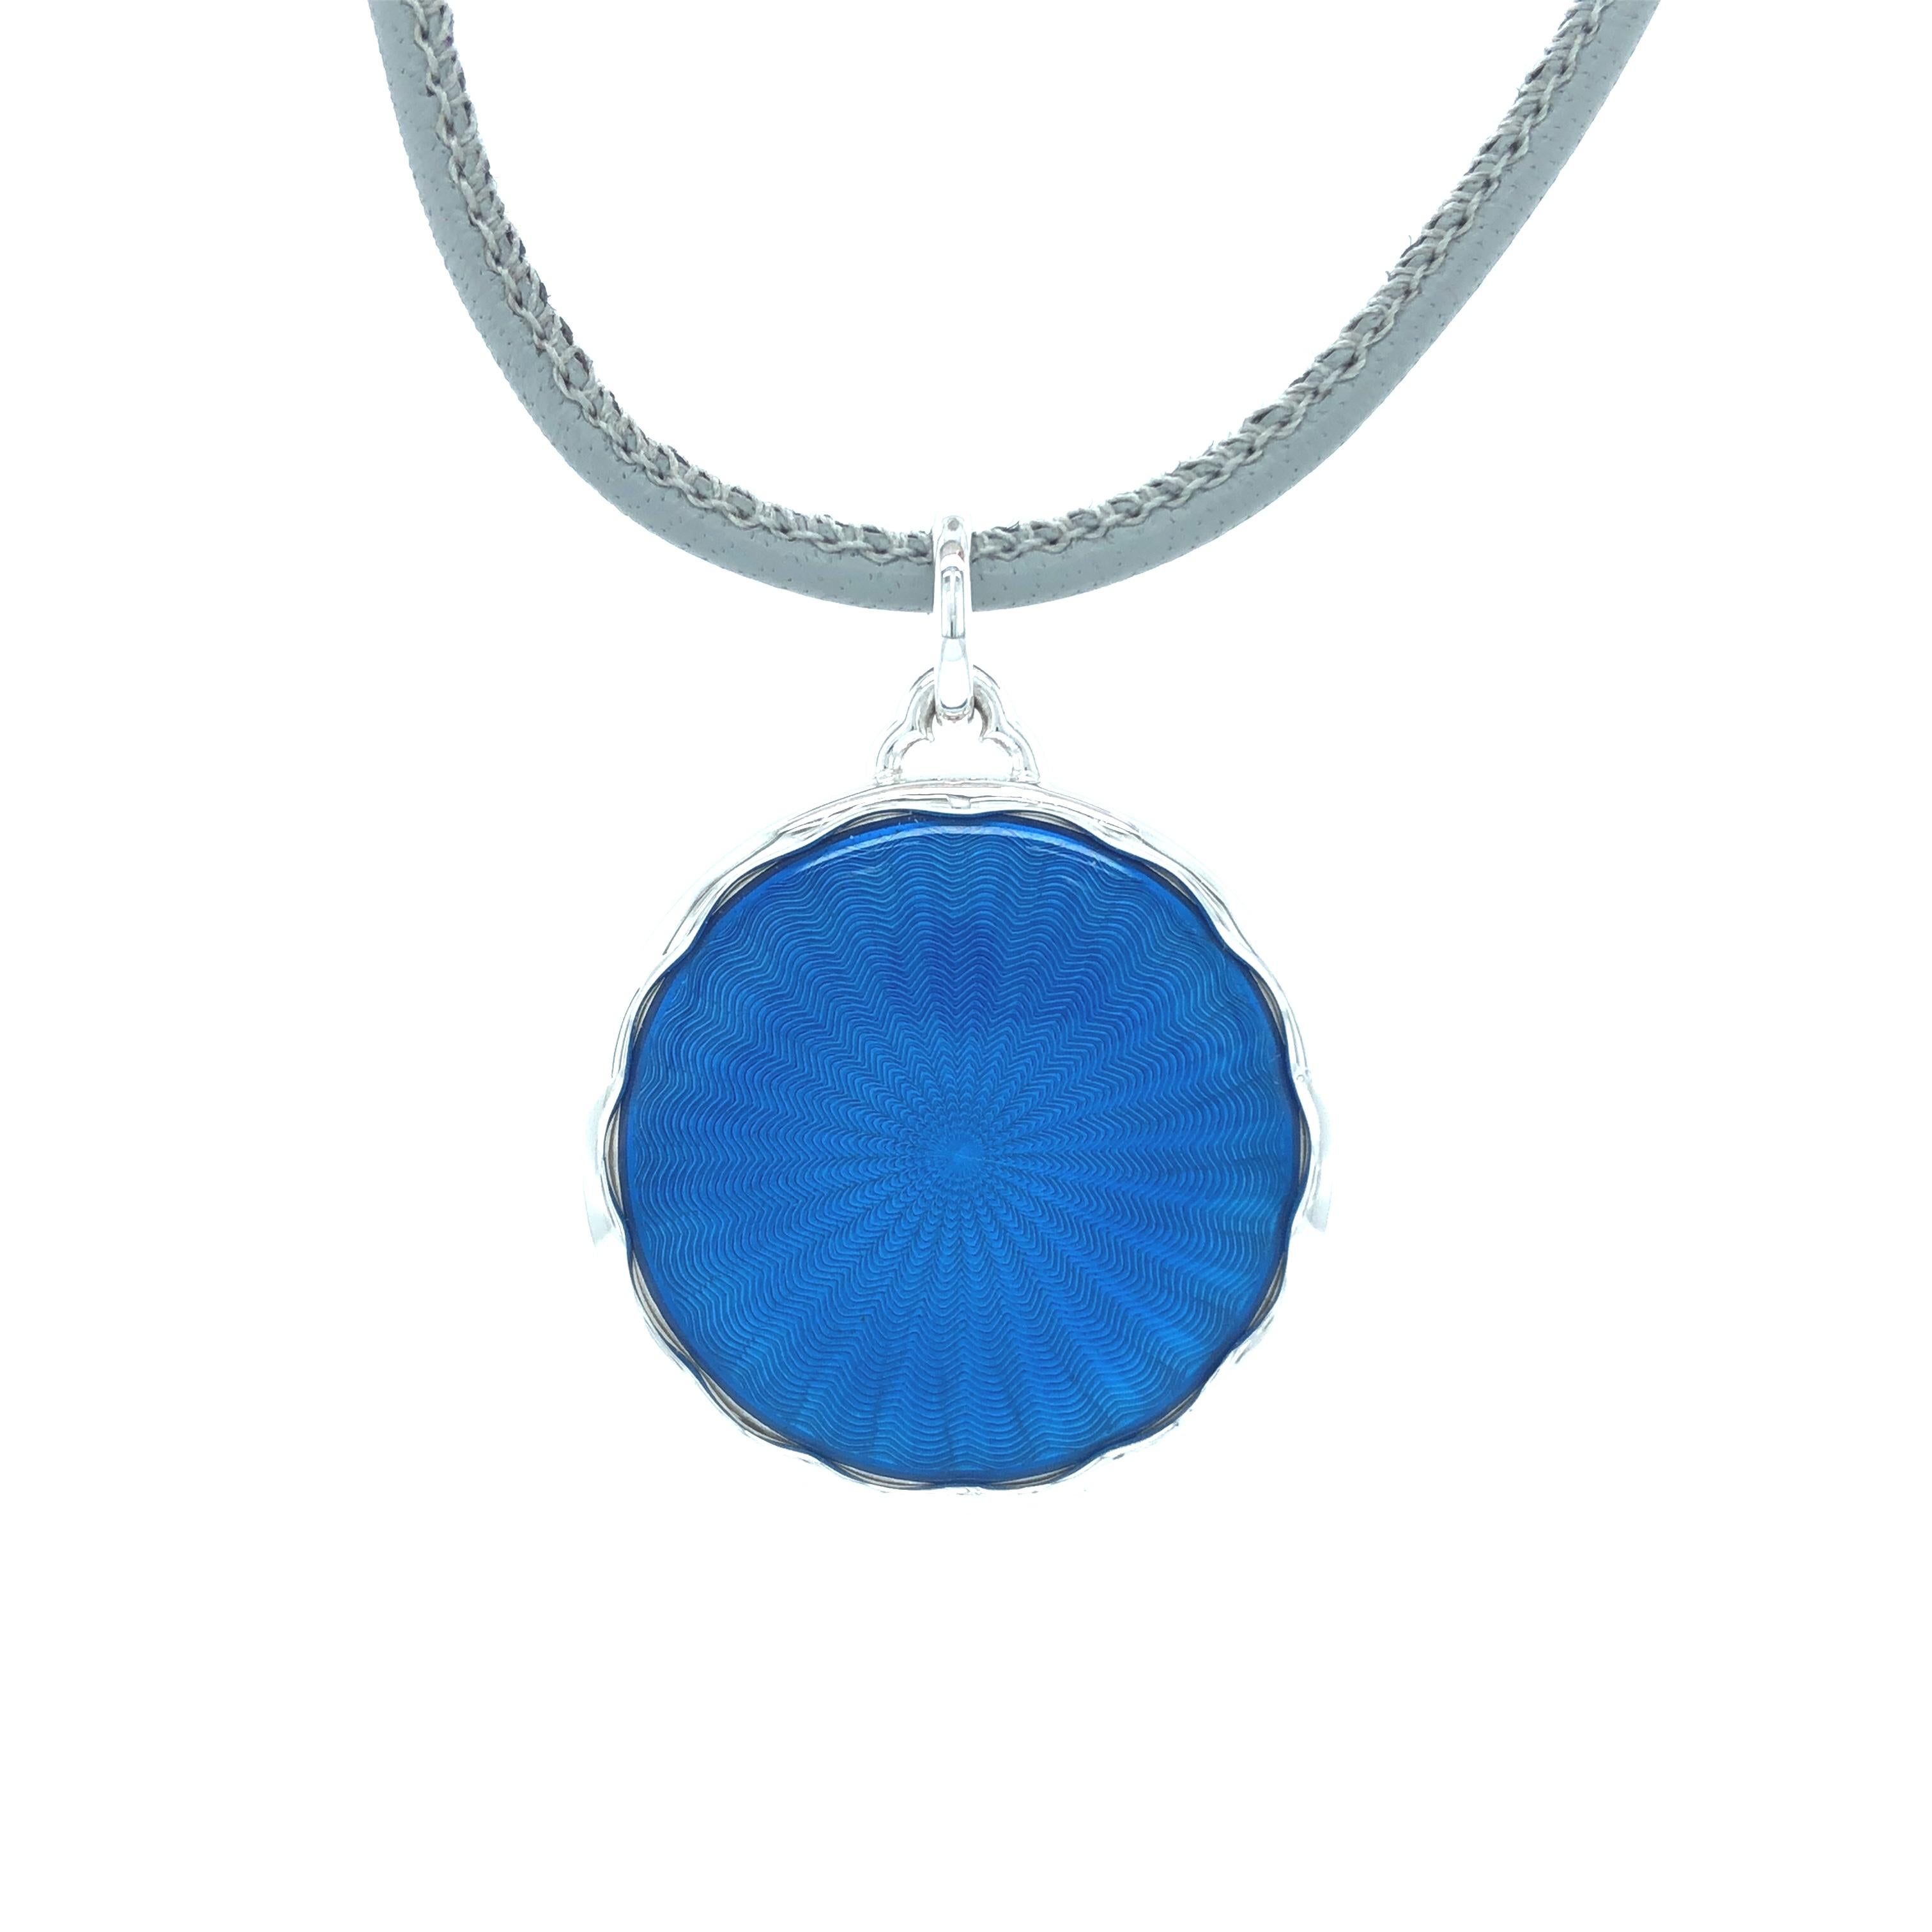 Victor Mayer round pendant collier 18k white gold/925-sterling silver, Macaron Collection, translucent blue vitreous enamel, guilloche, grey leather strap, diameter app. 27.2 mm

About the creator Victor Mayer
Victor Mayer is internationally